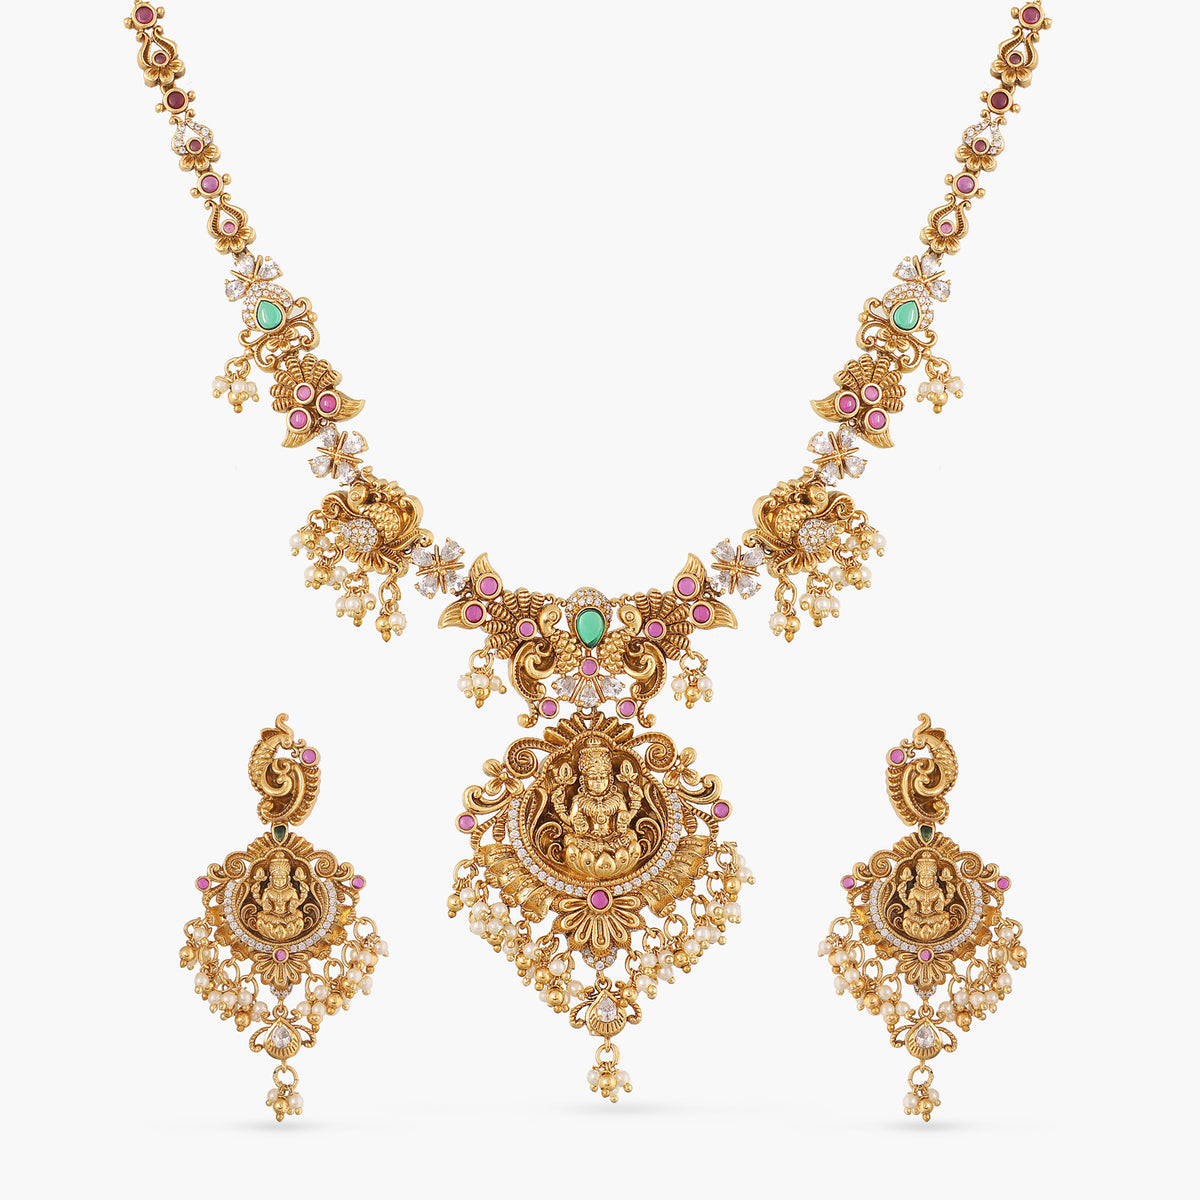 A picture of an Indian antique gold plated necklace with goddess Laxmi, featuring red and green gemstones.